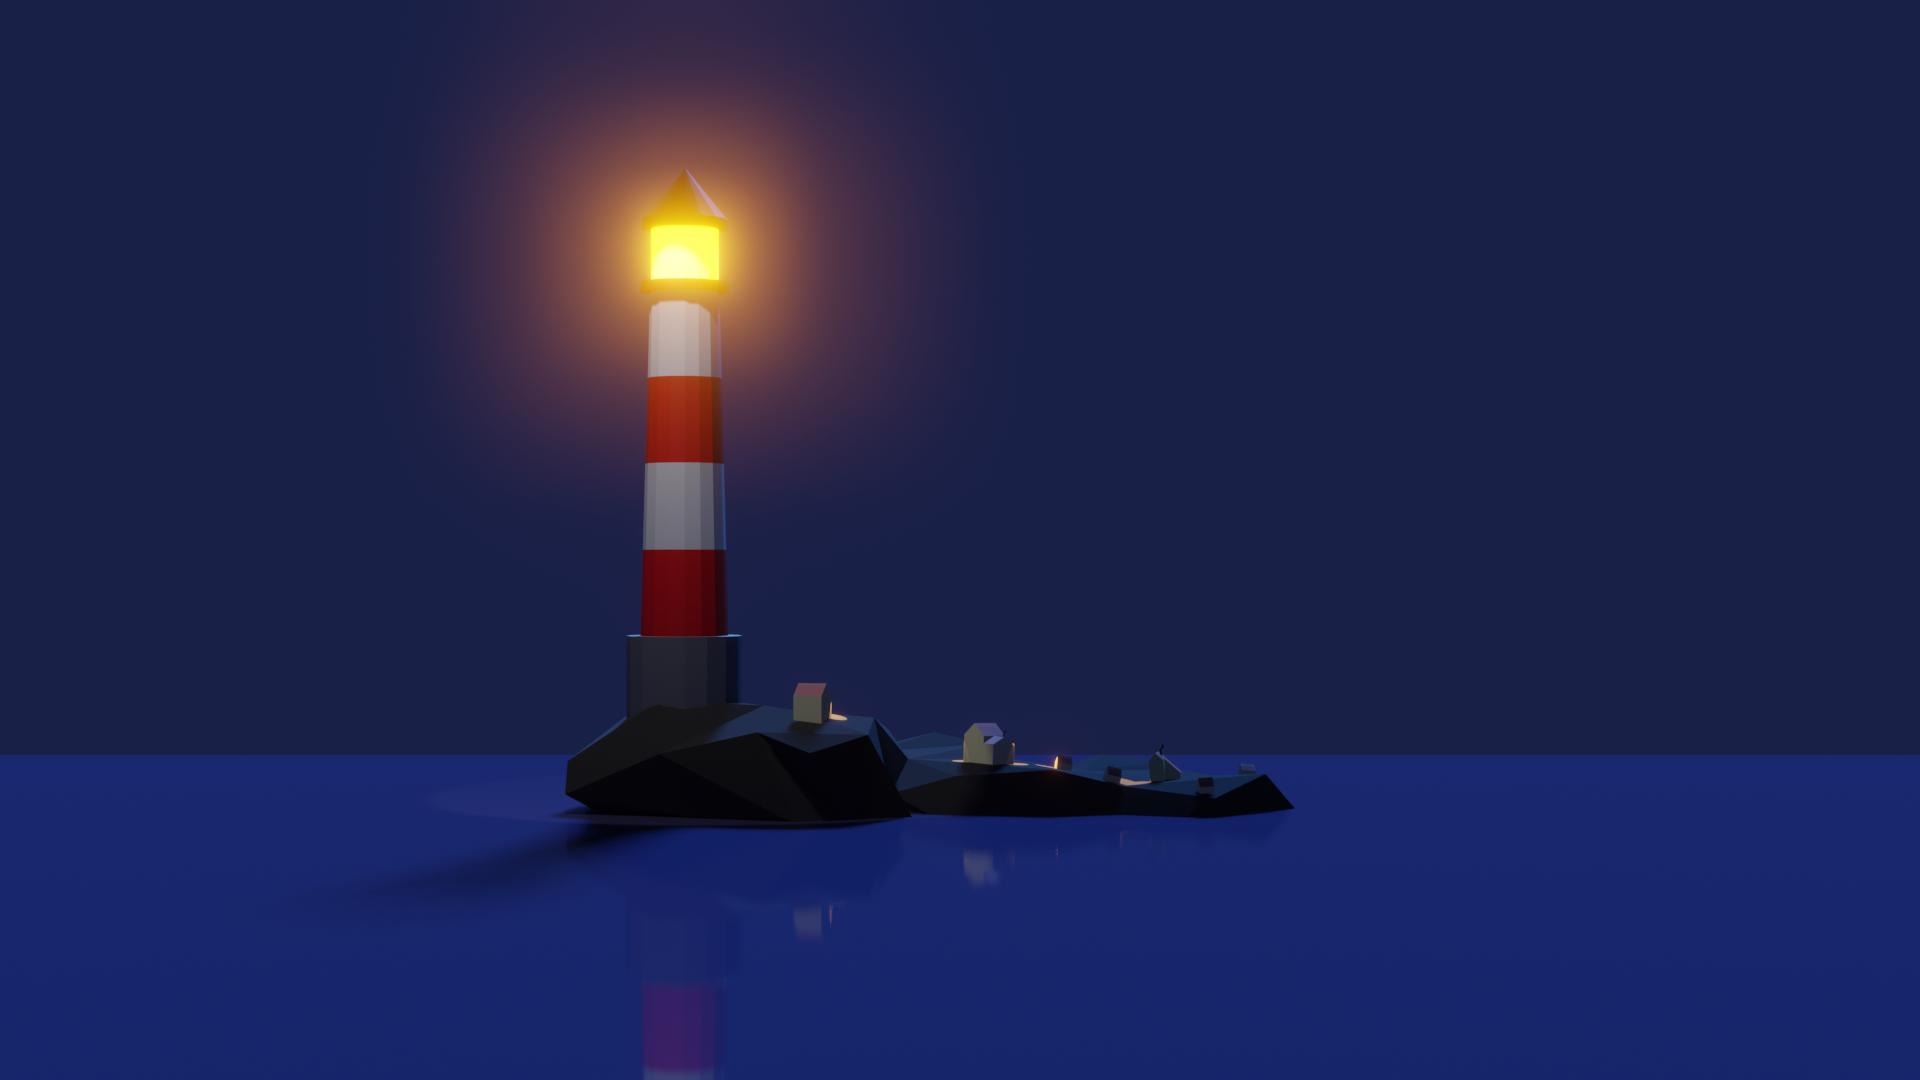 Low poly scene with a lighthouse on a rocky island